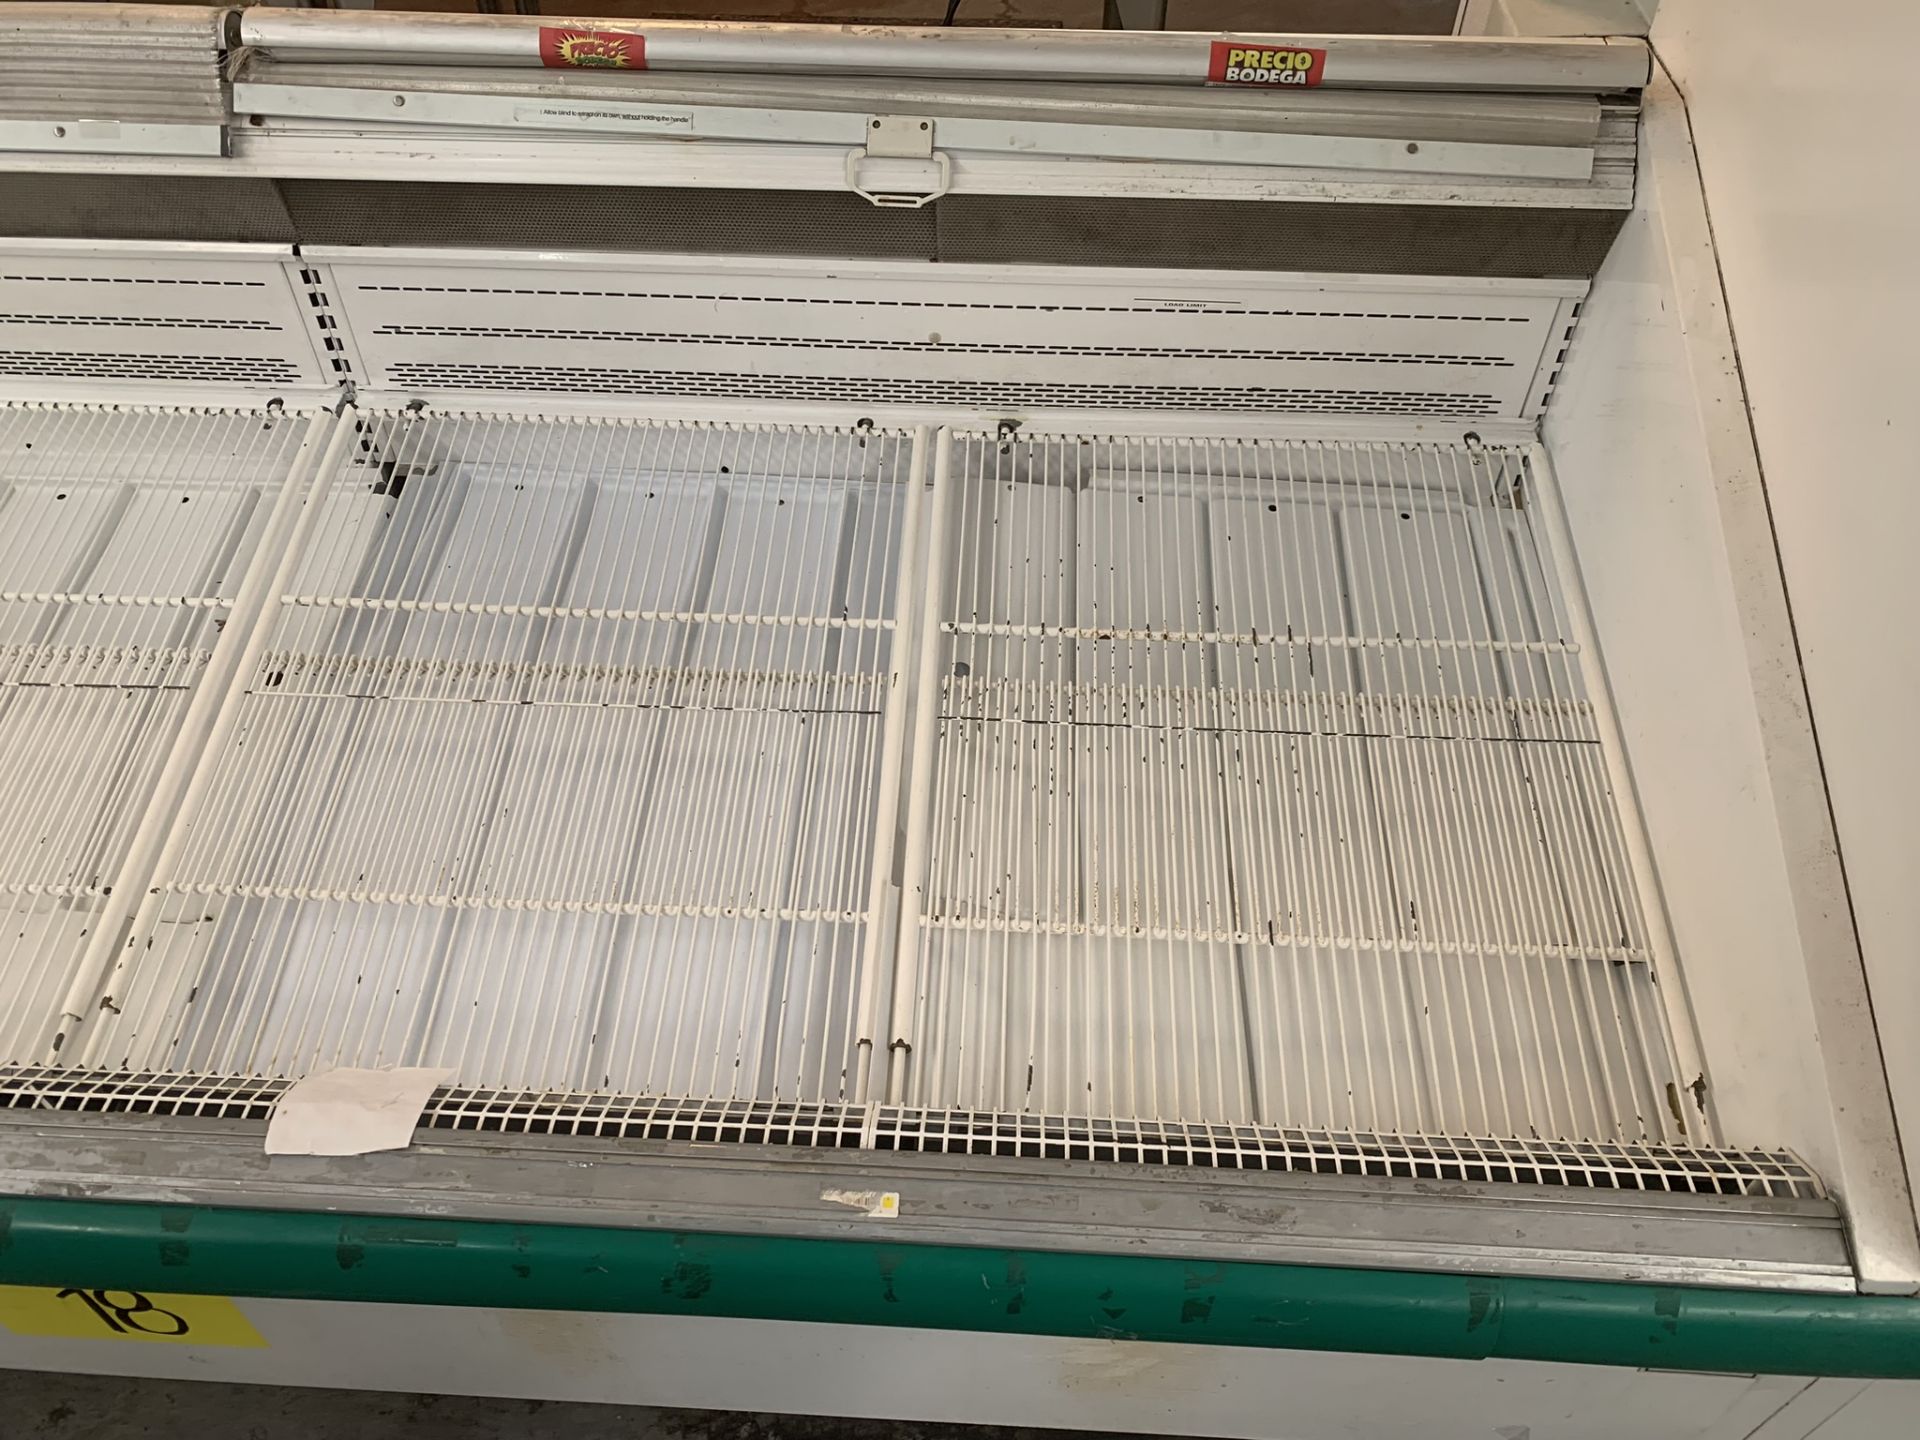 Hussmann bunker-type refrigerated display case for meats measures 2.55 x 1.10 x 0.90 mts - Image 7 of 8